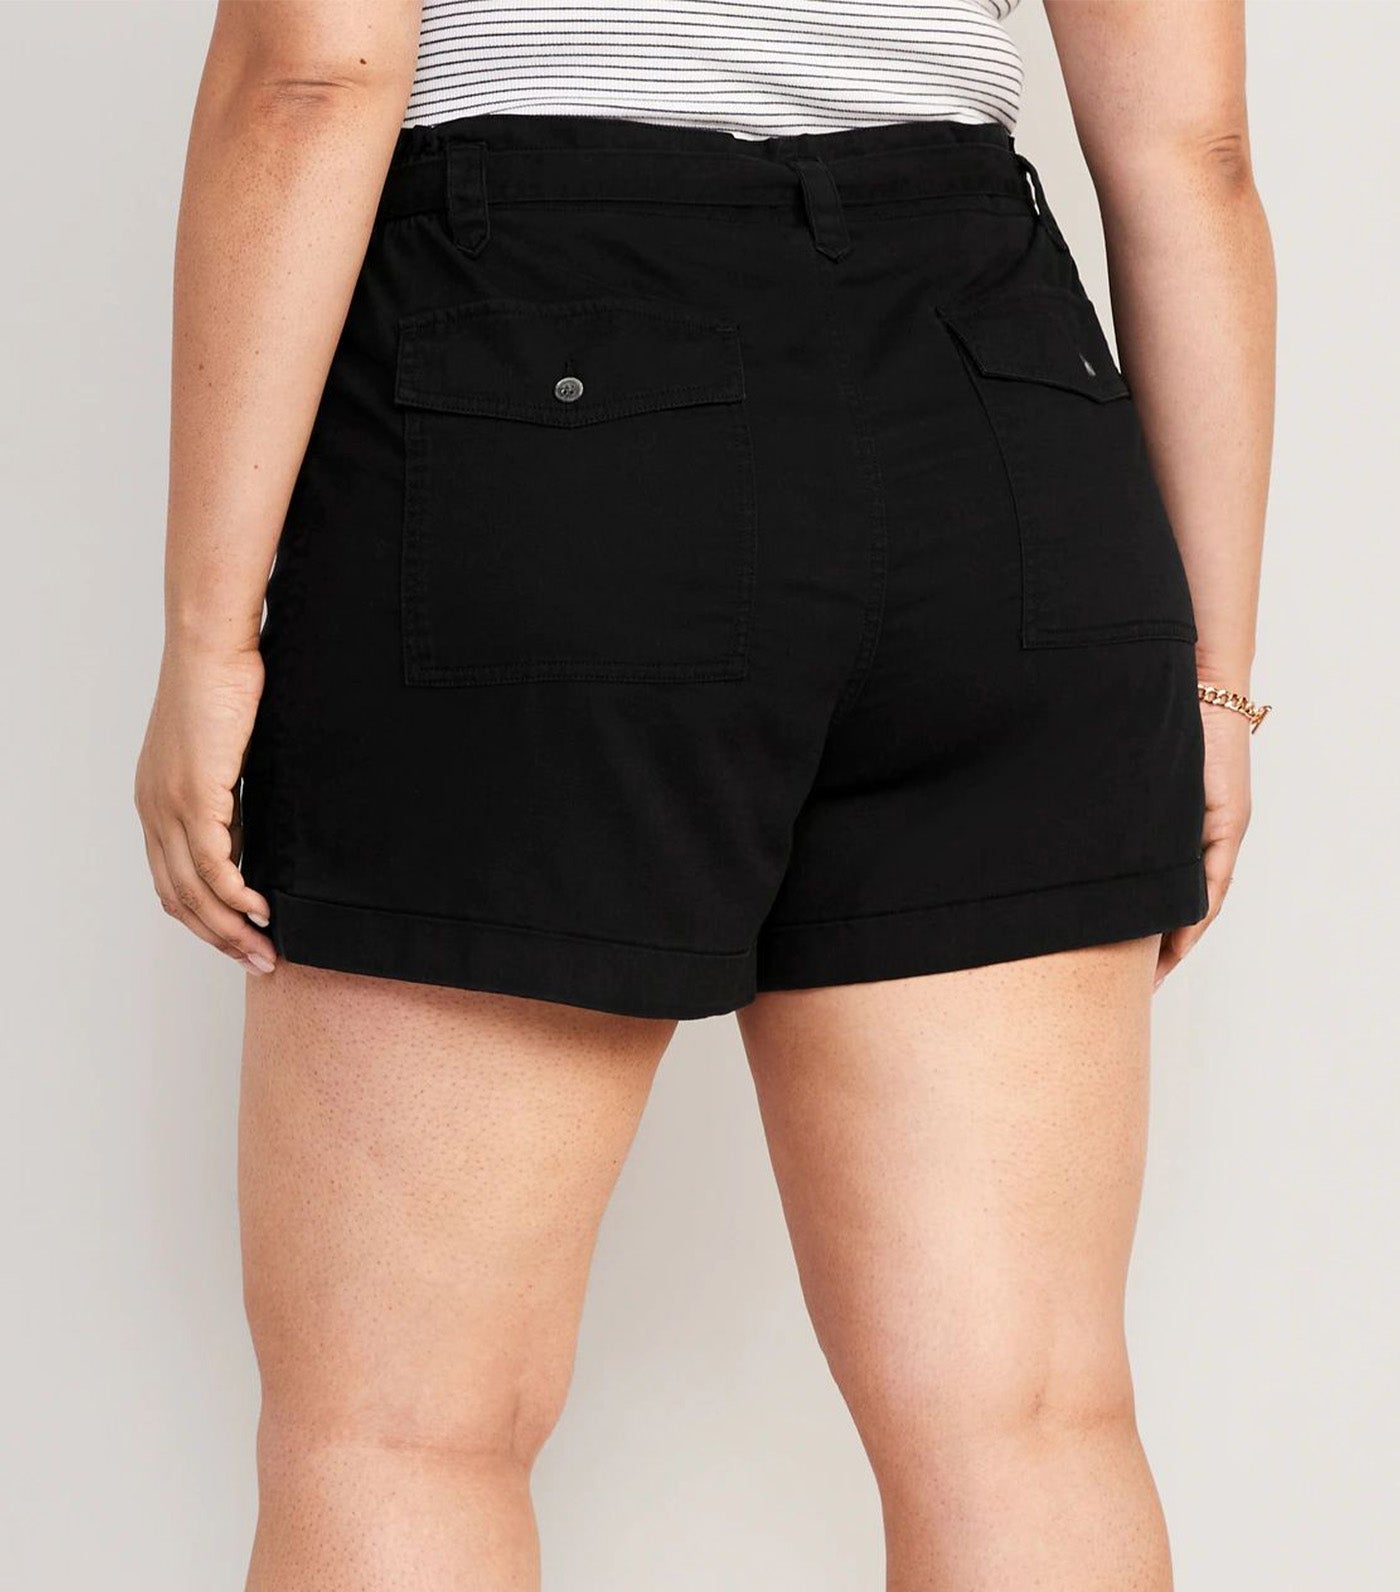 Extra High-Waisted Tie-Front Cargo Workwear Shorts for Women 4-inch Inseam Black Jack